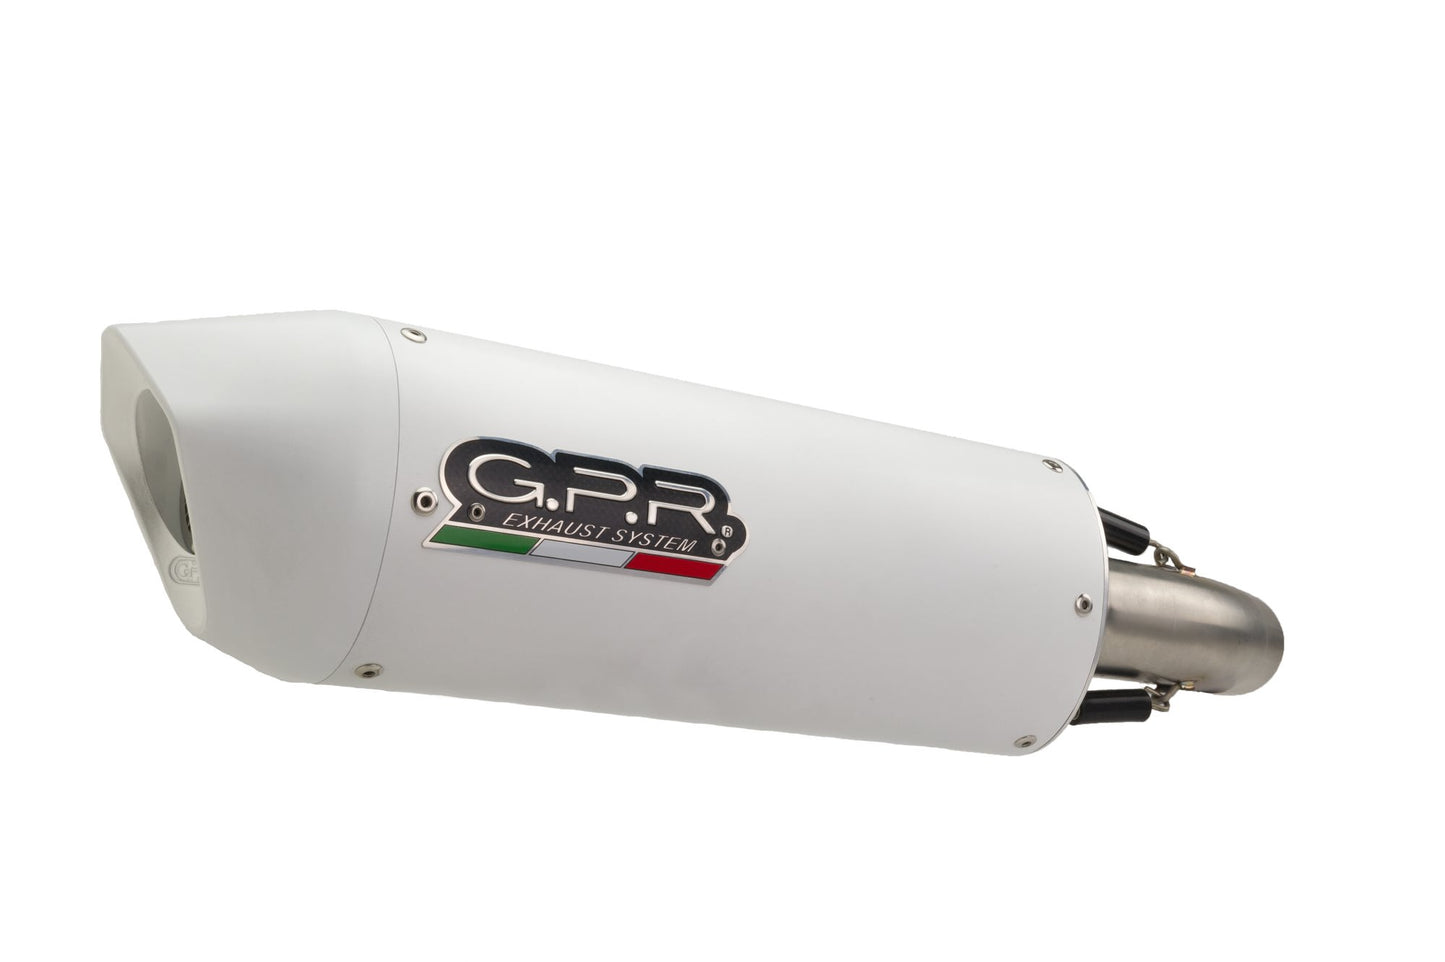 GPR Exhaust for Bmw K1300S K1300R 2009-2014, Albus Ceramic, Slip-on Exhaust Including Removable DB Killer and Link Pipe  BMW.41.ALB